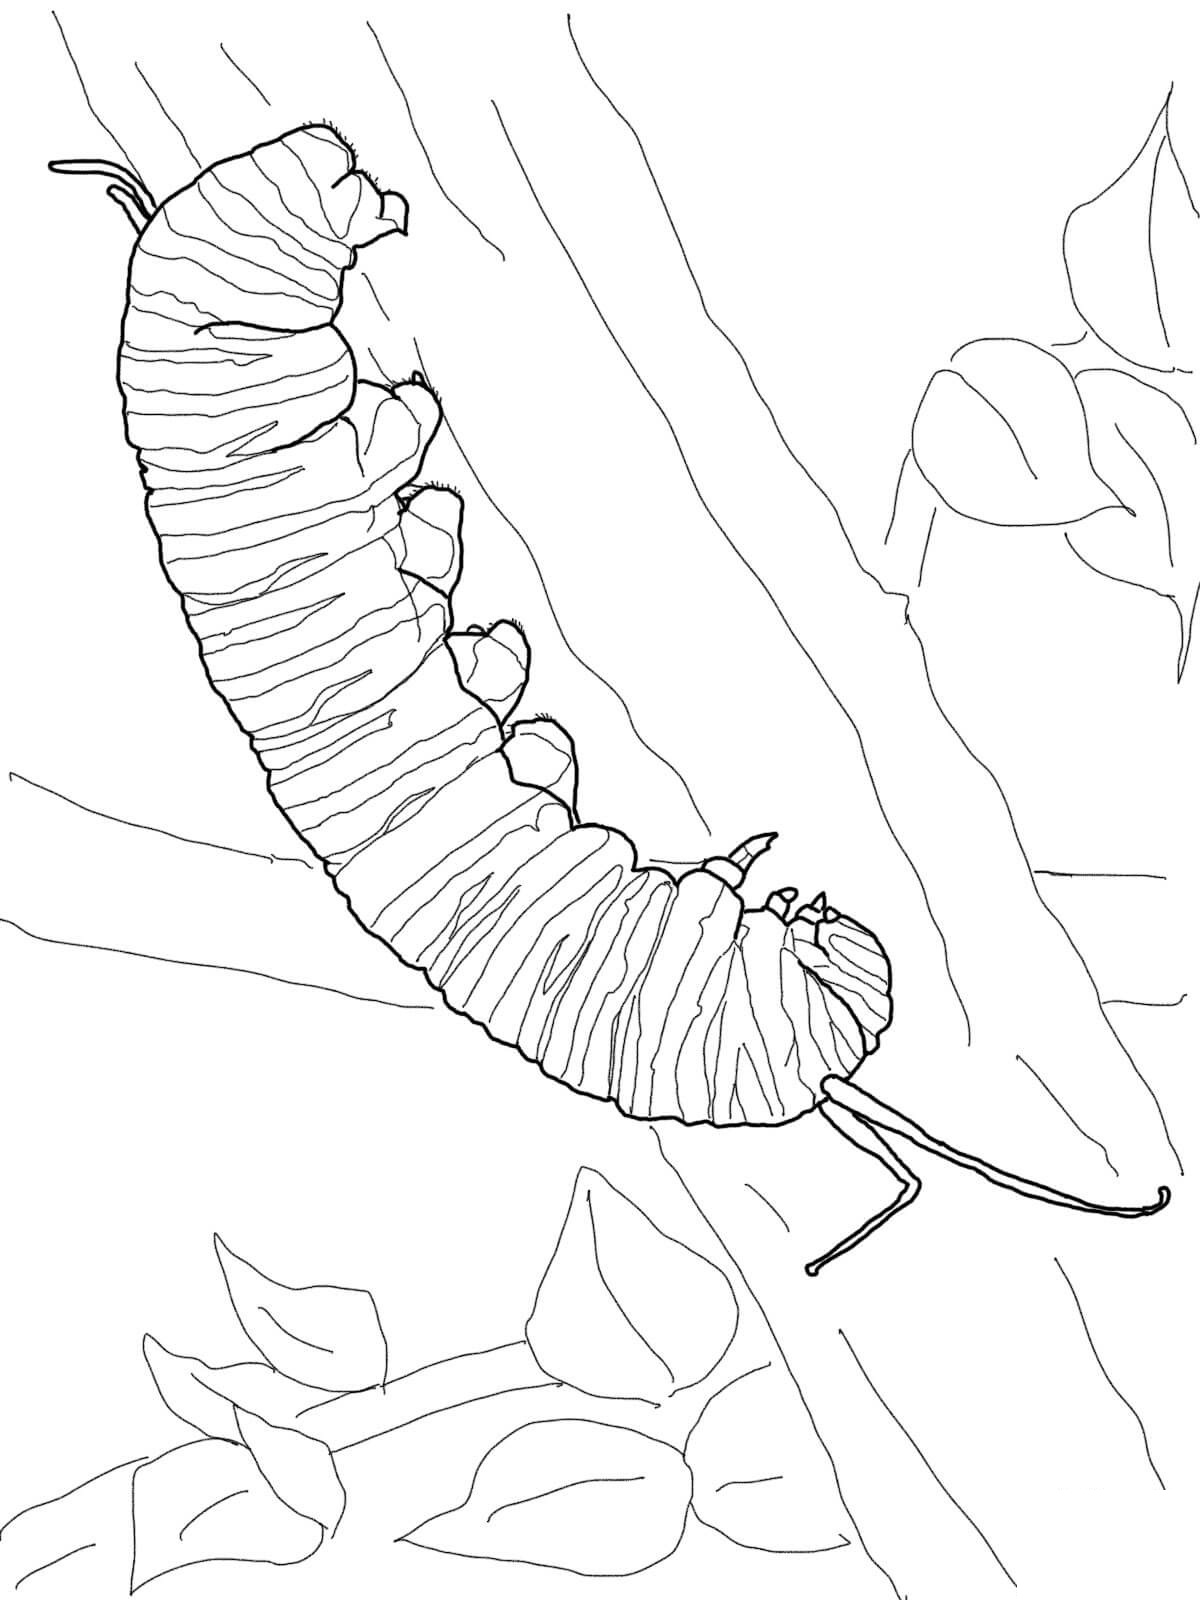 monarch-caterpillar-coloring-page - Nature Coloring Pages